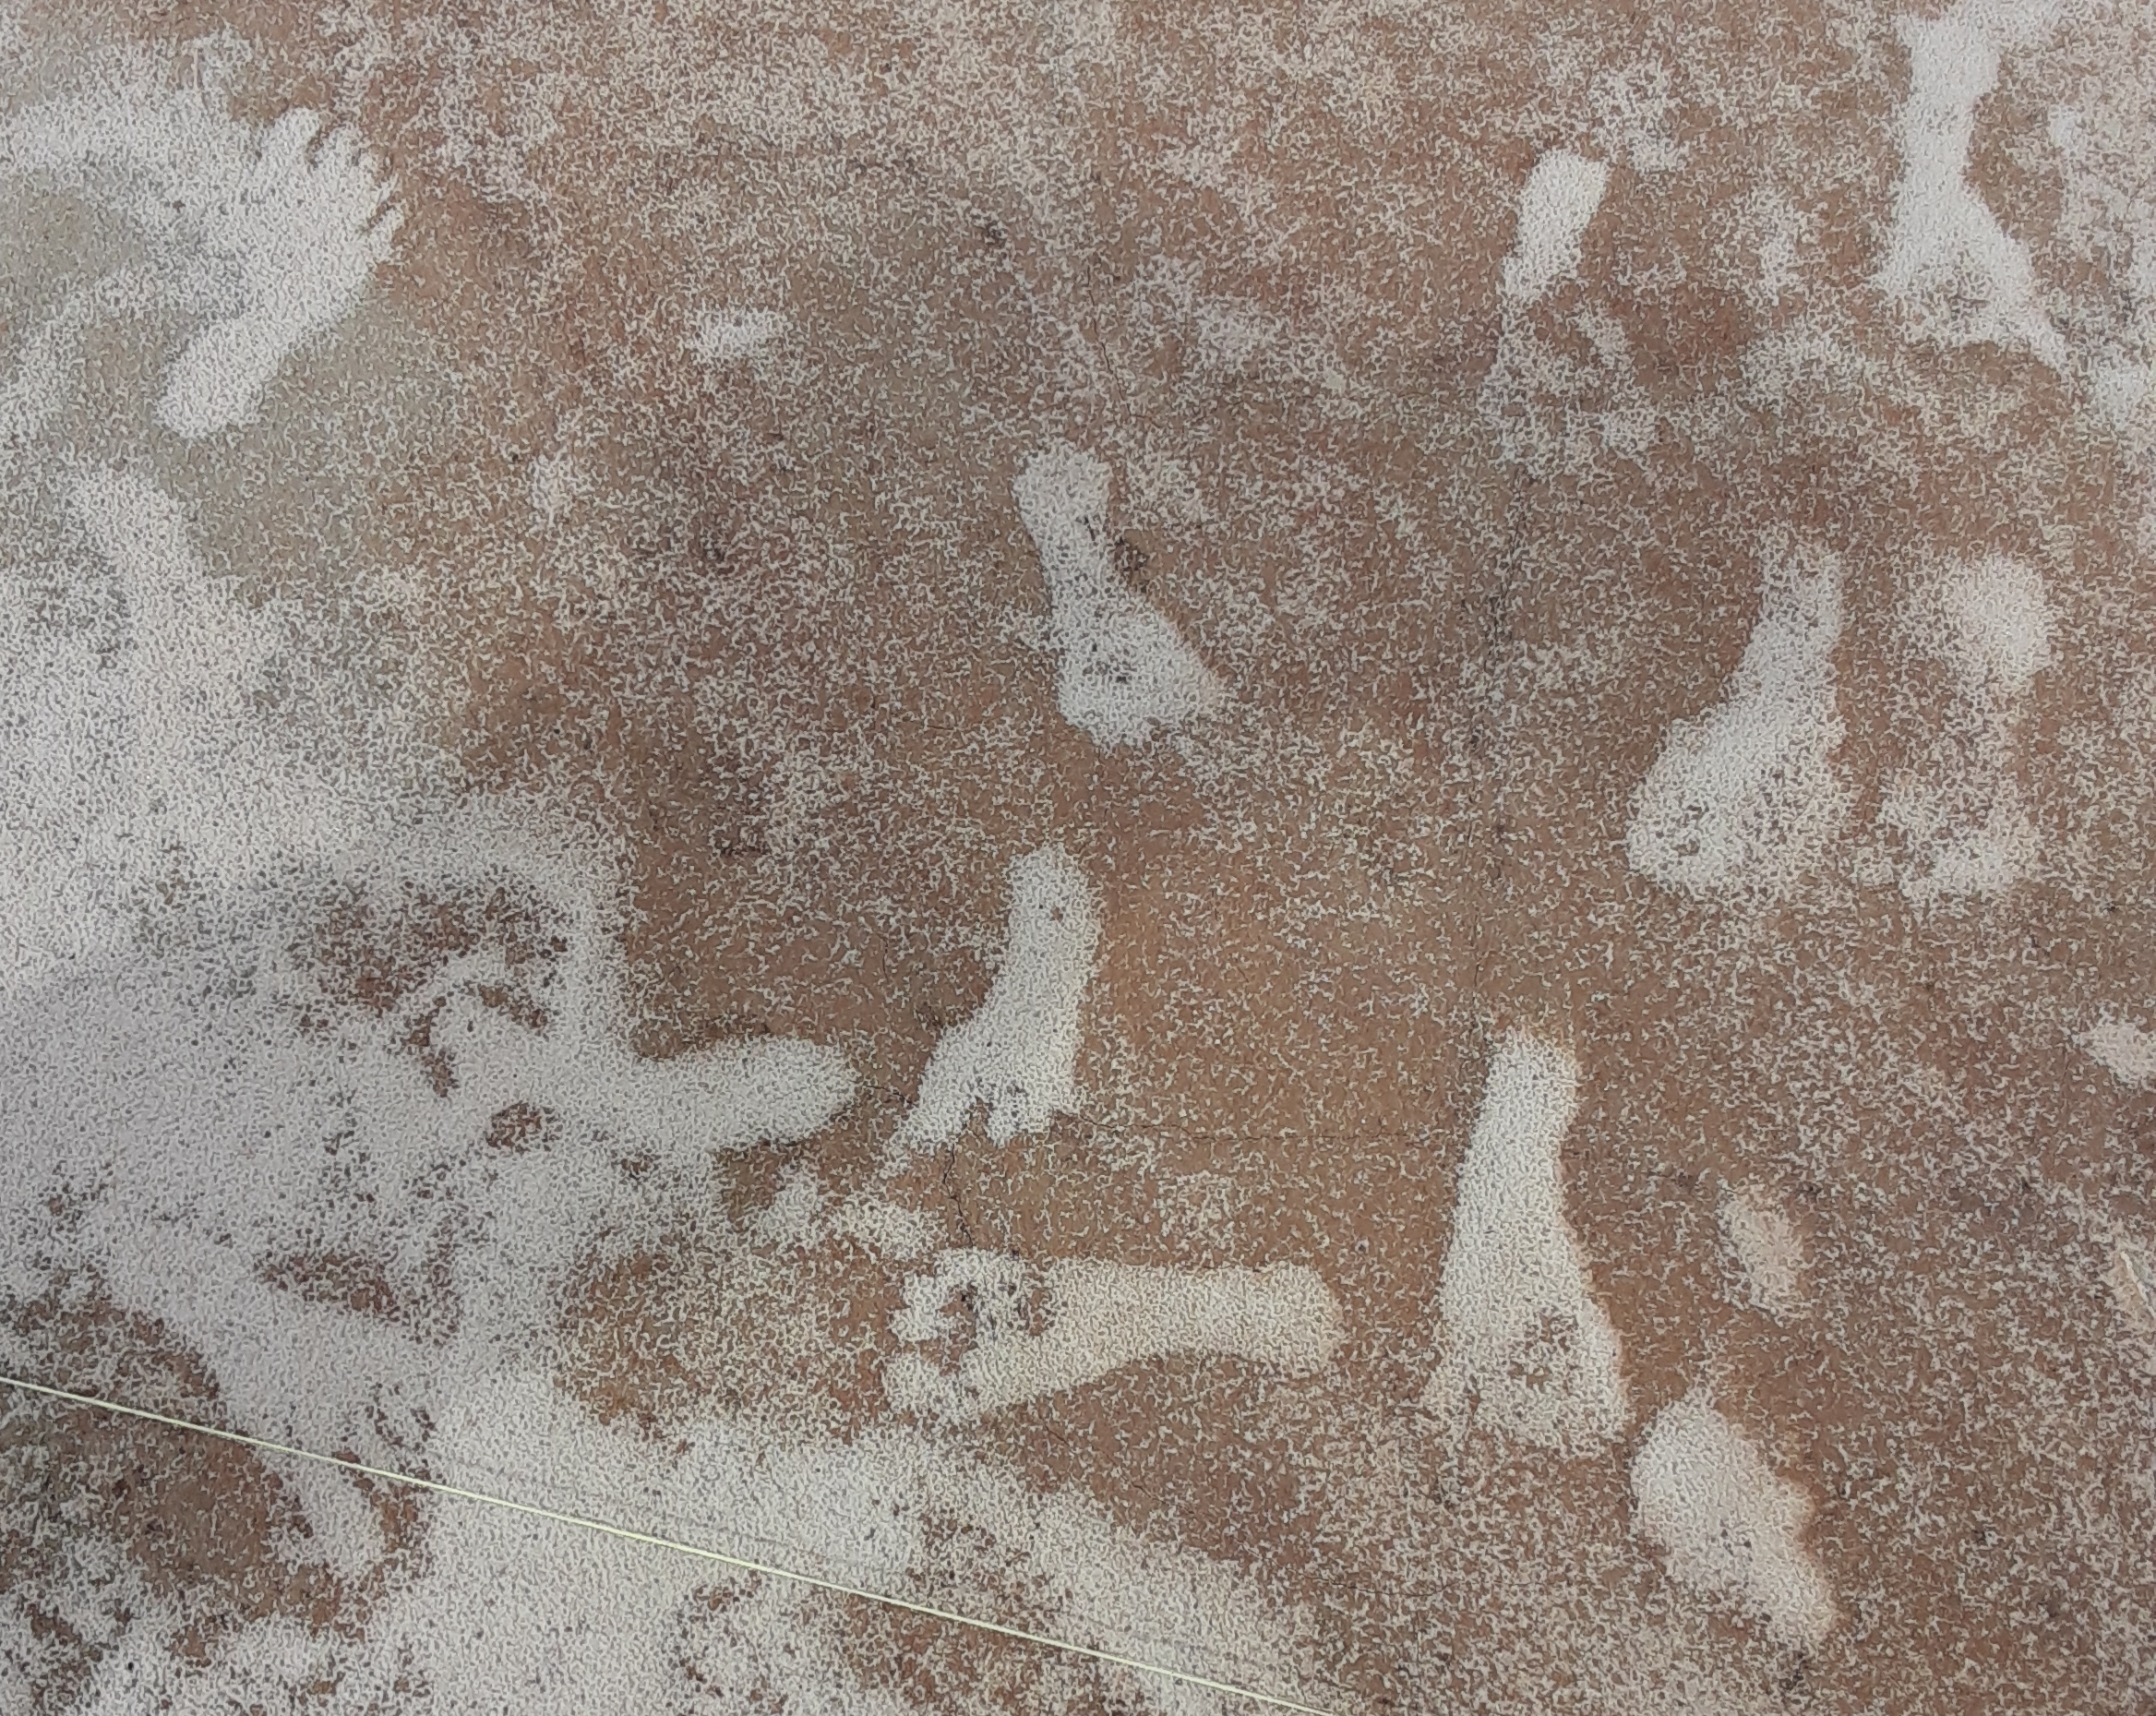 Aerial image of fossilized human footprints in the gypsum sand.